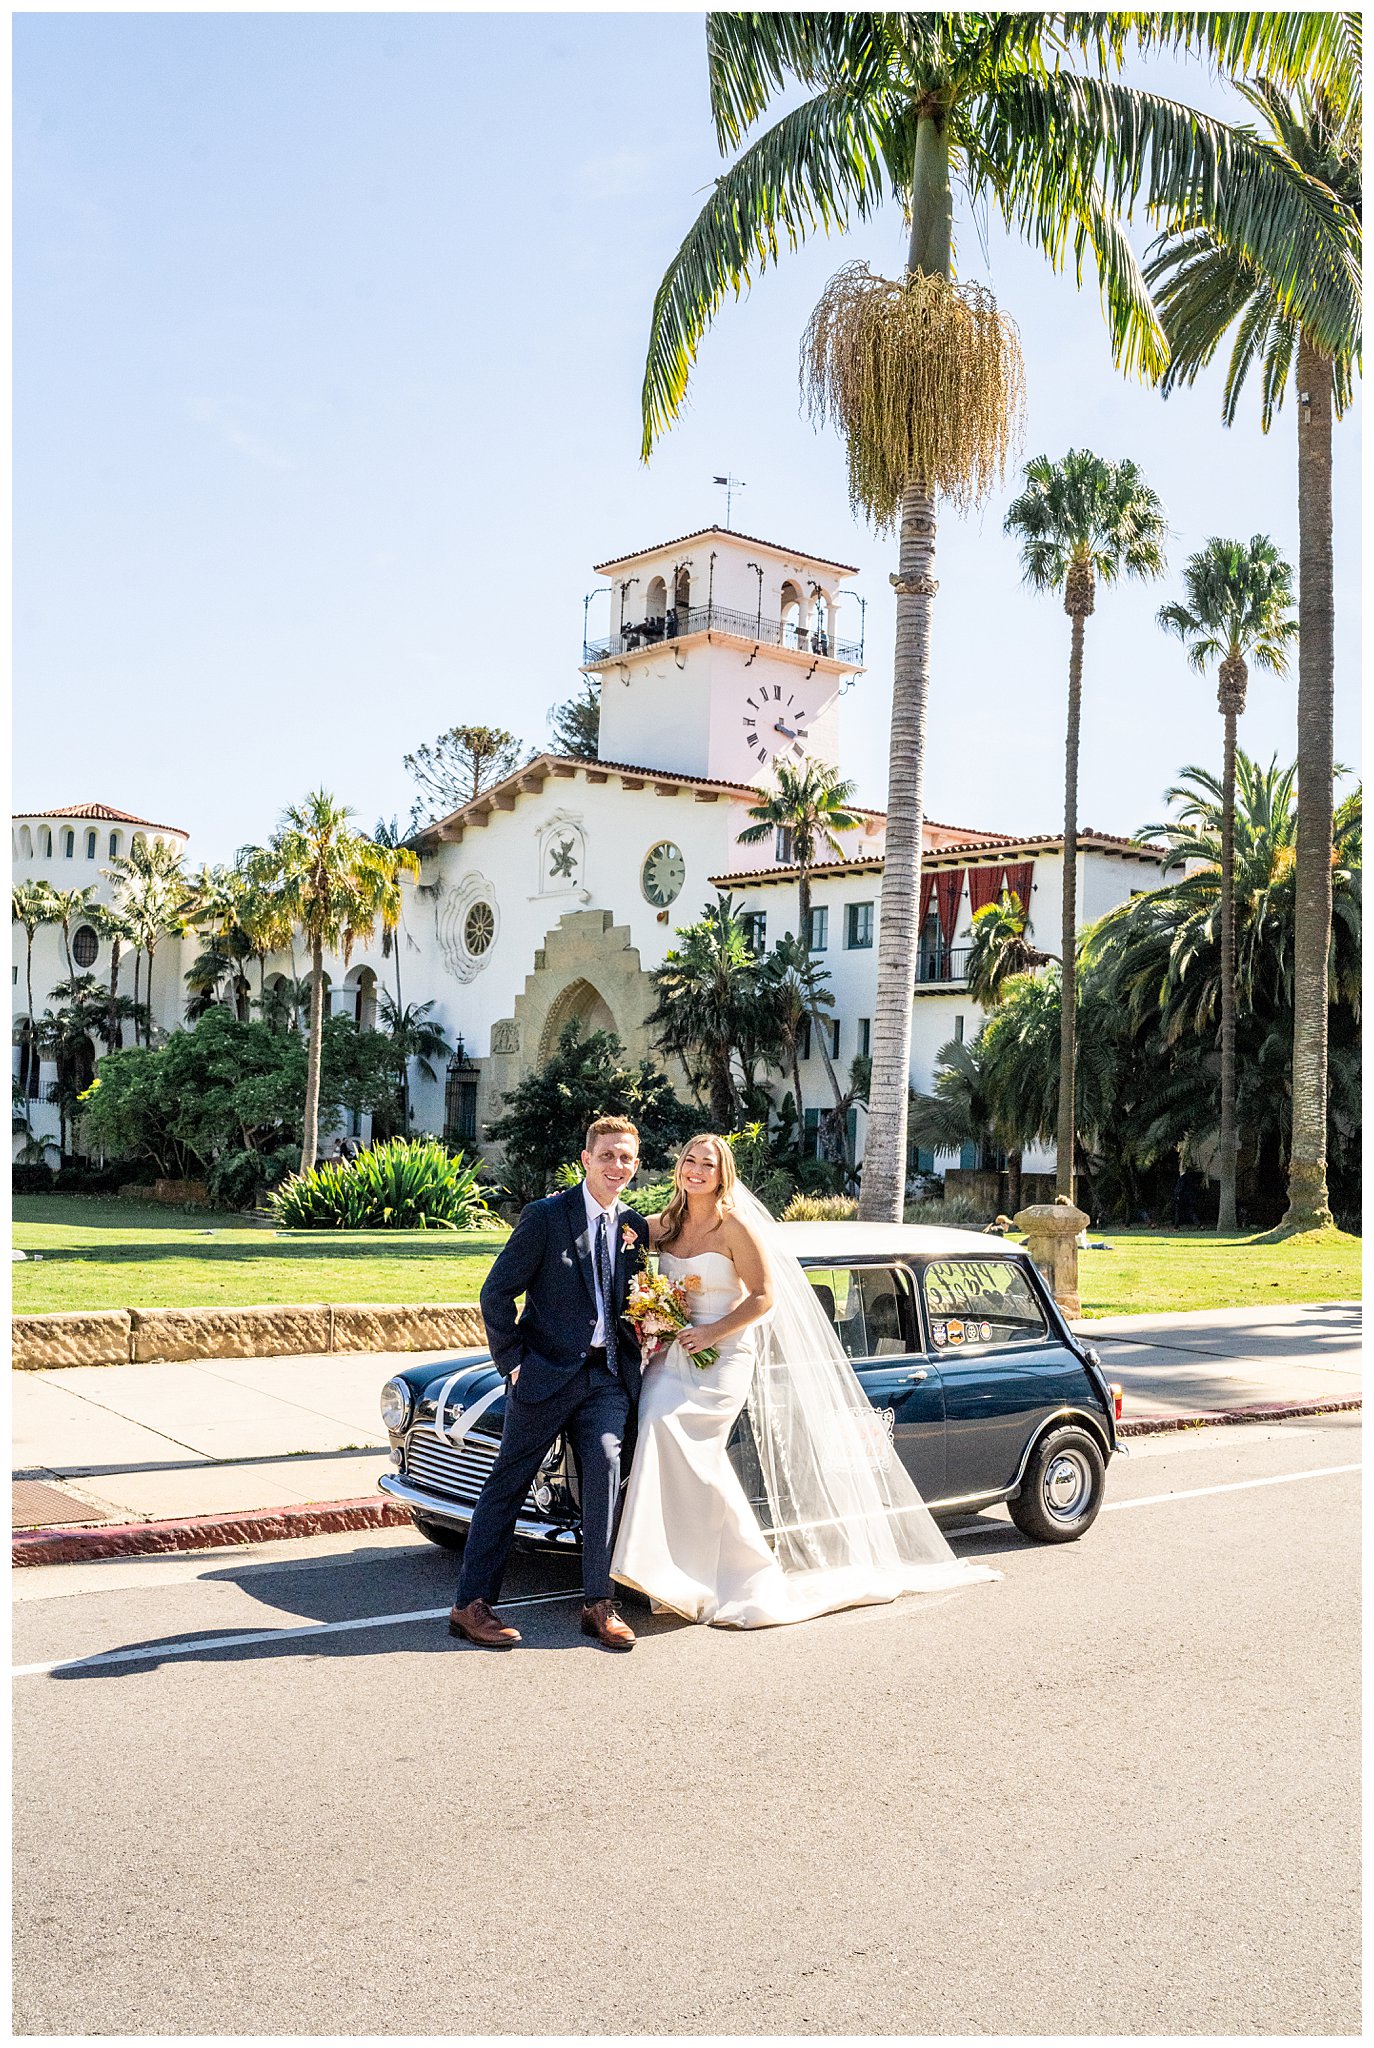 At Bride and Groom, lean against an old-fashioned car and wedding attire in front of the Santa Barbara courthouse for an iconic Hollywood wedding photo.